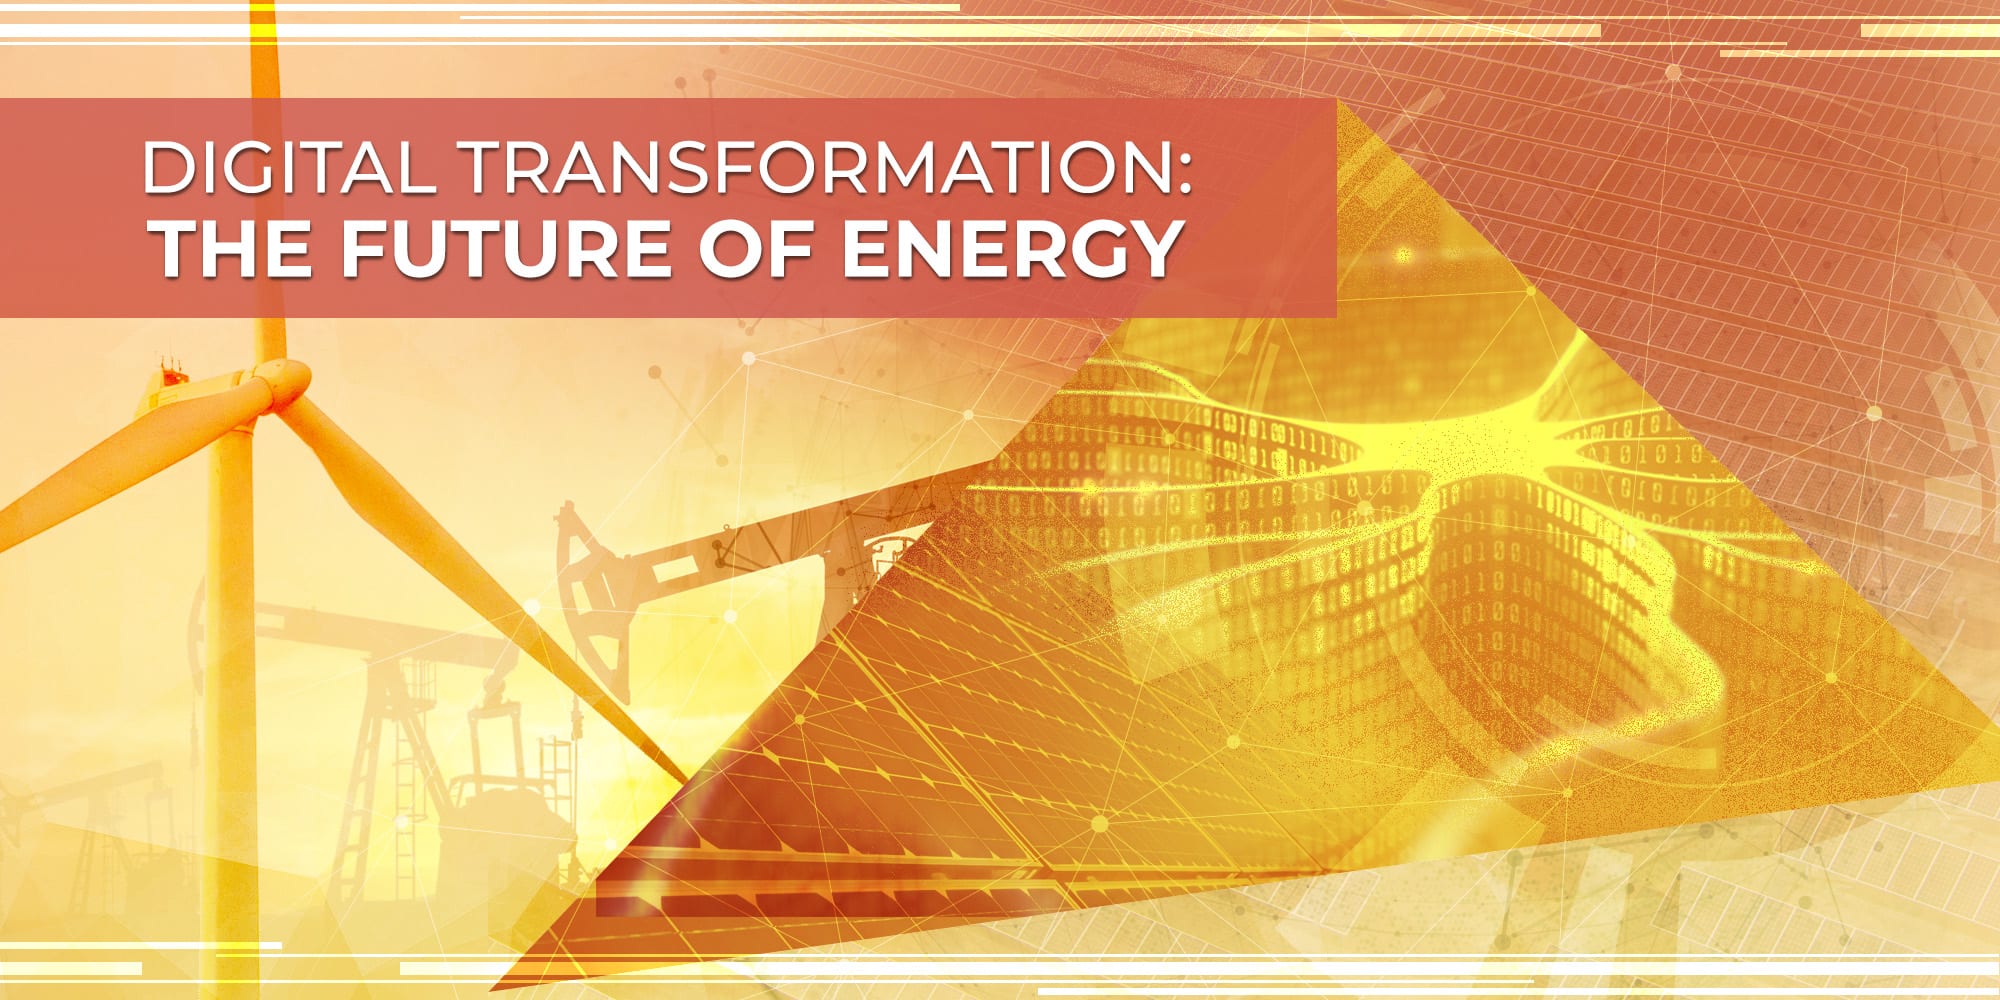 Digital Transformation: The Future of Energy